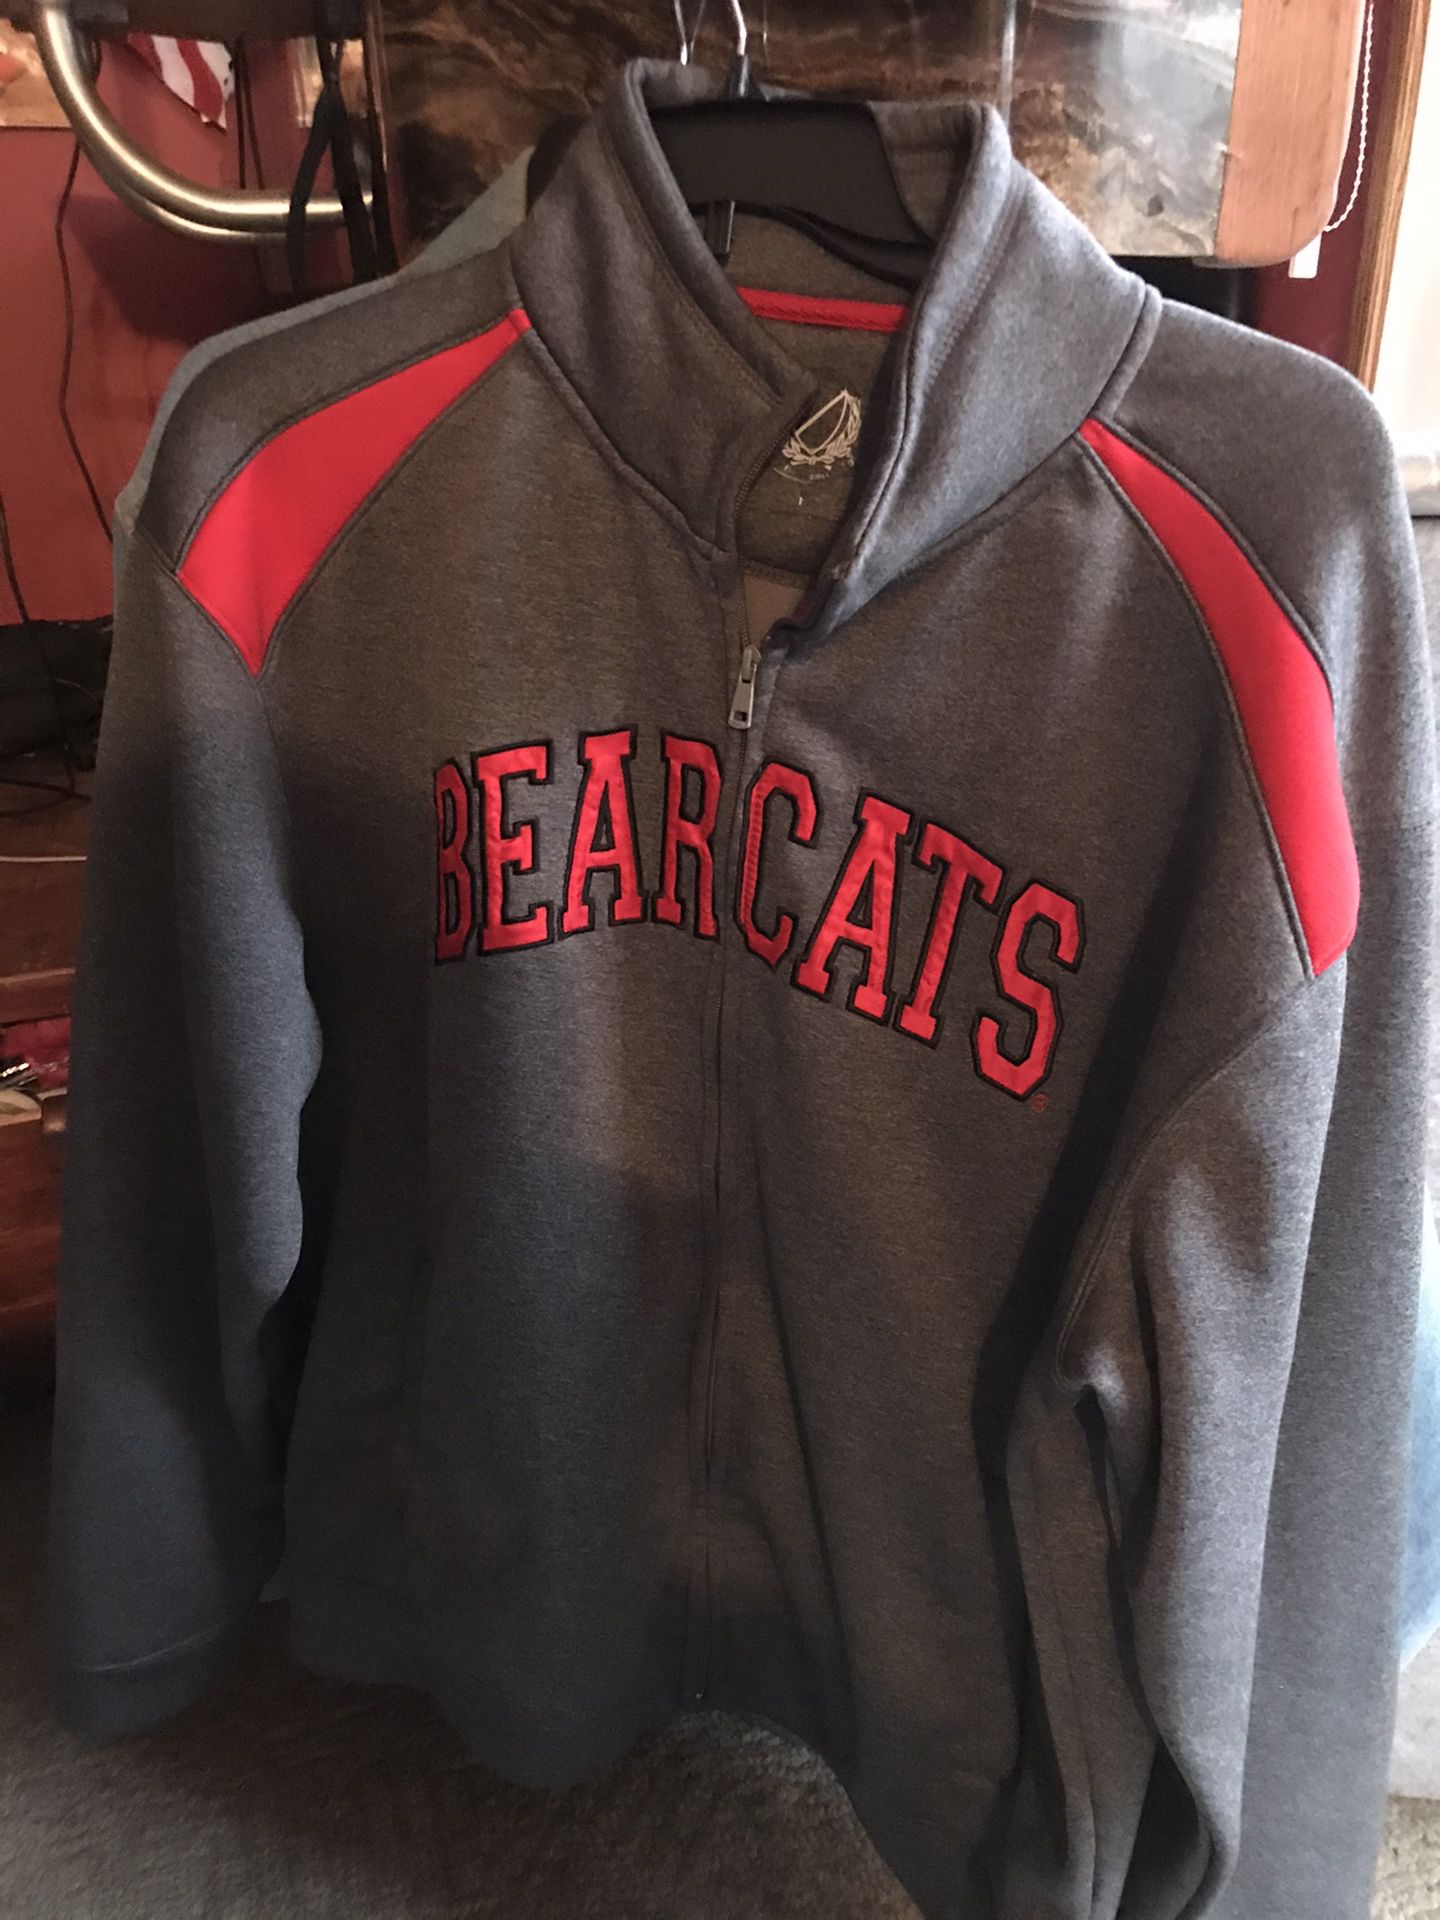 3 hoodie/1-Bearcats / adidas-under Amour !